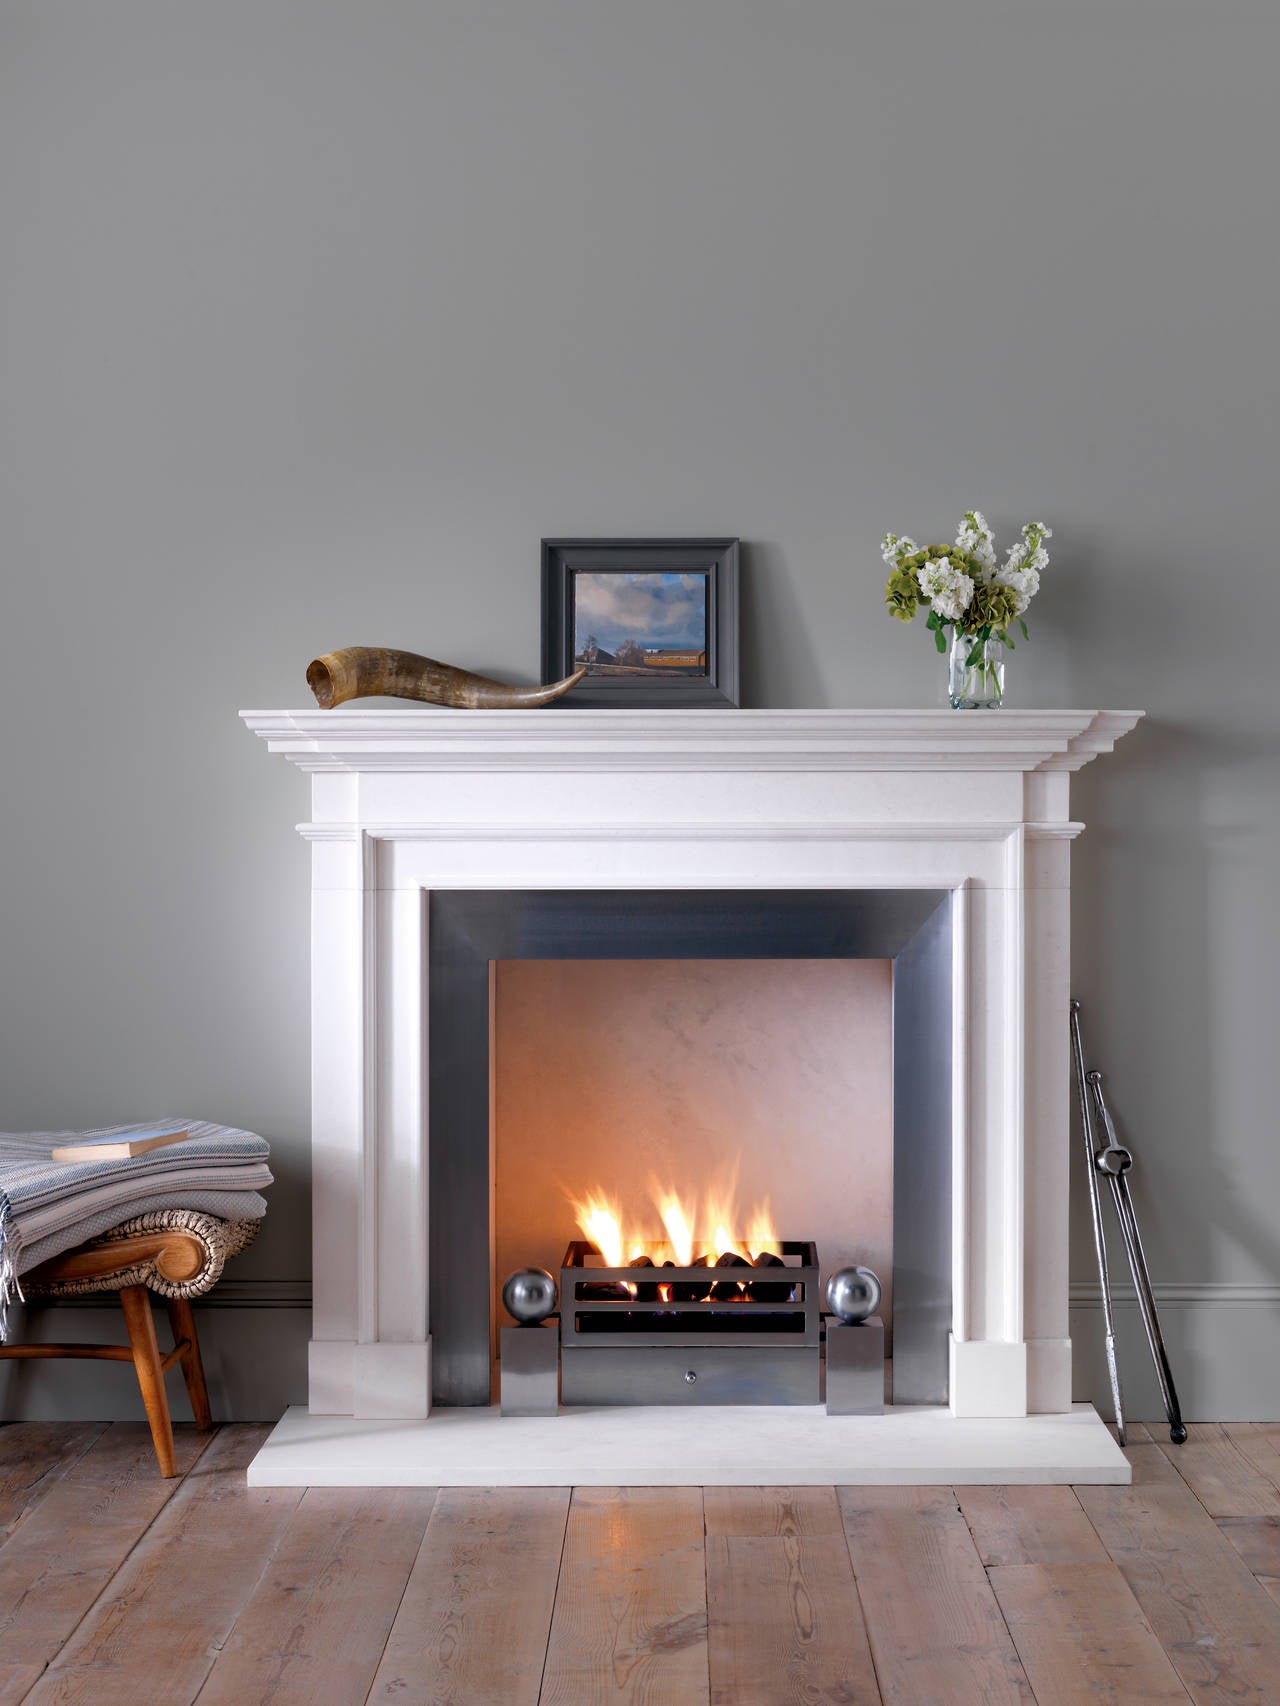 Classically proportioned limestone mantel with breakfront shelf.